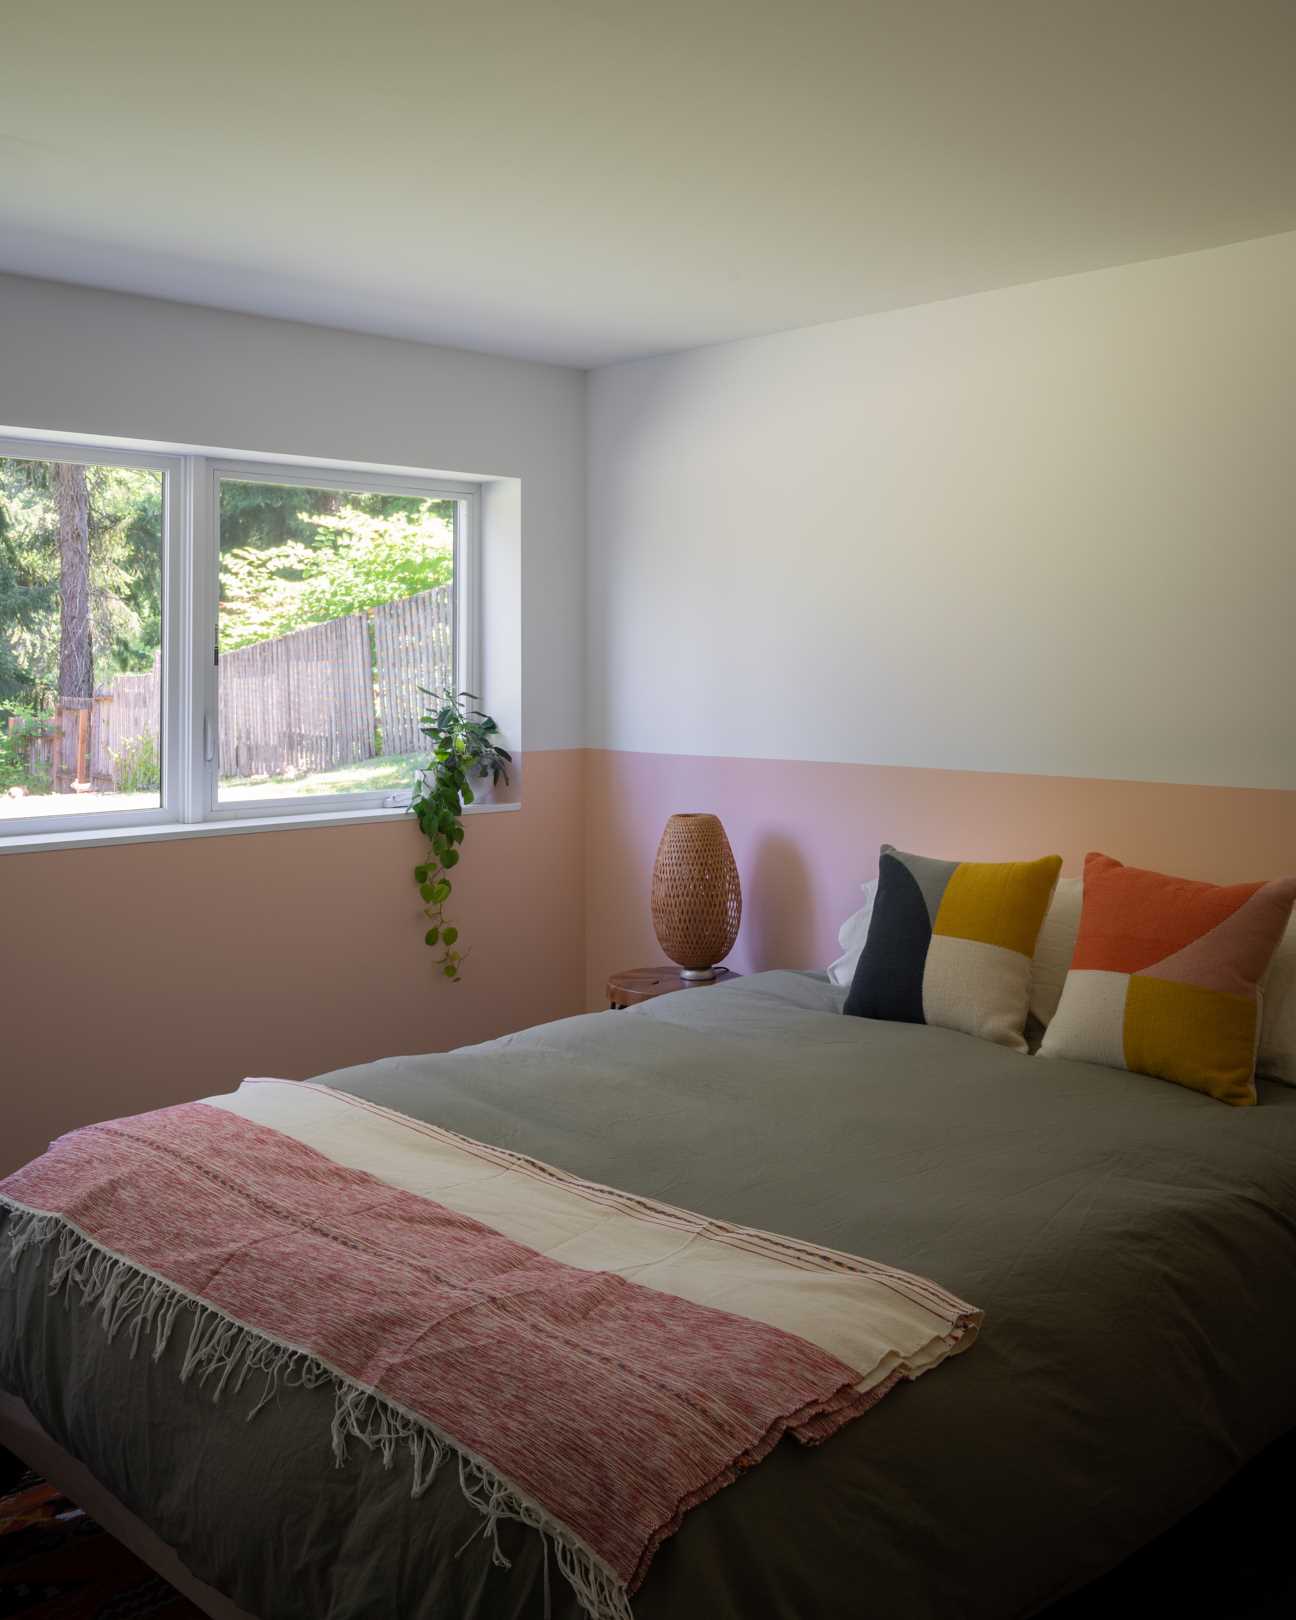 A contemporary bedroom with a colorful pink wraparound accent.